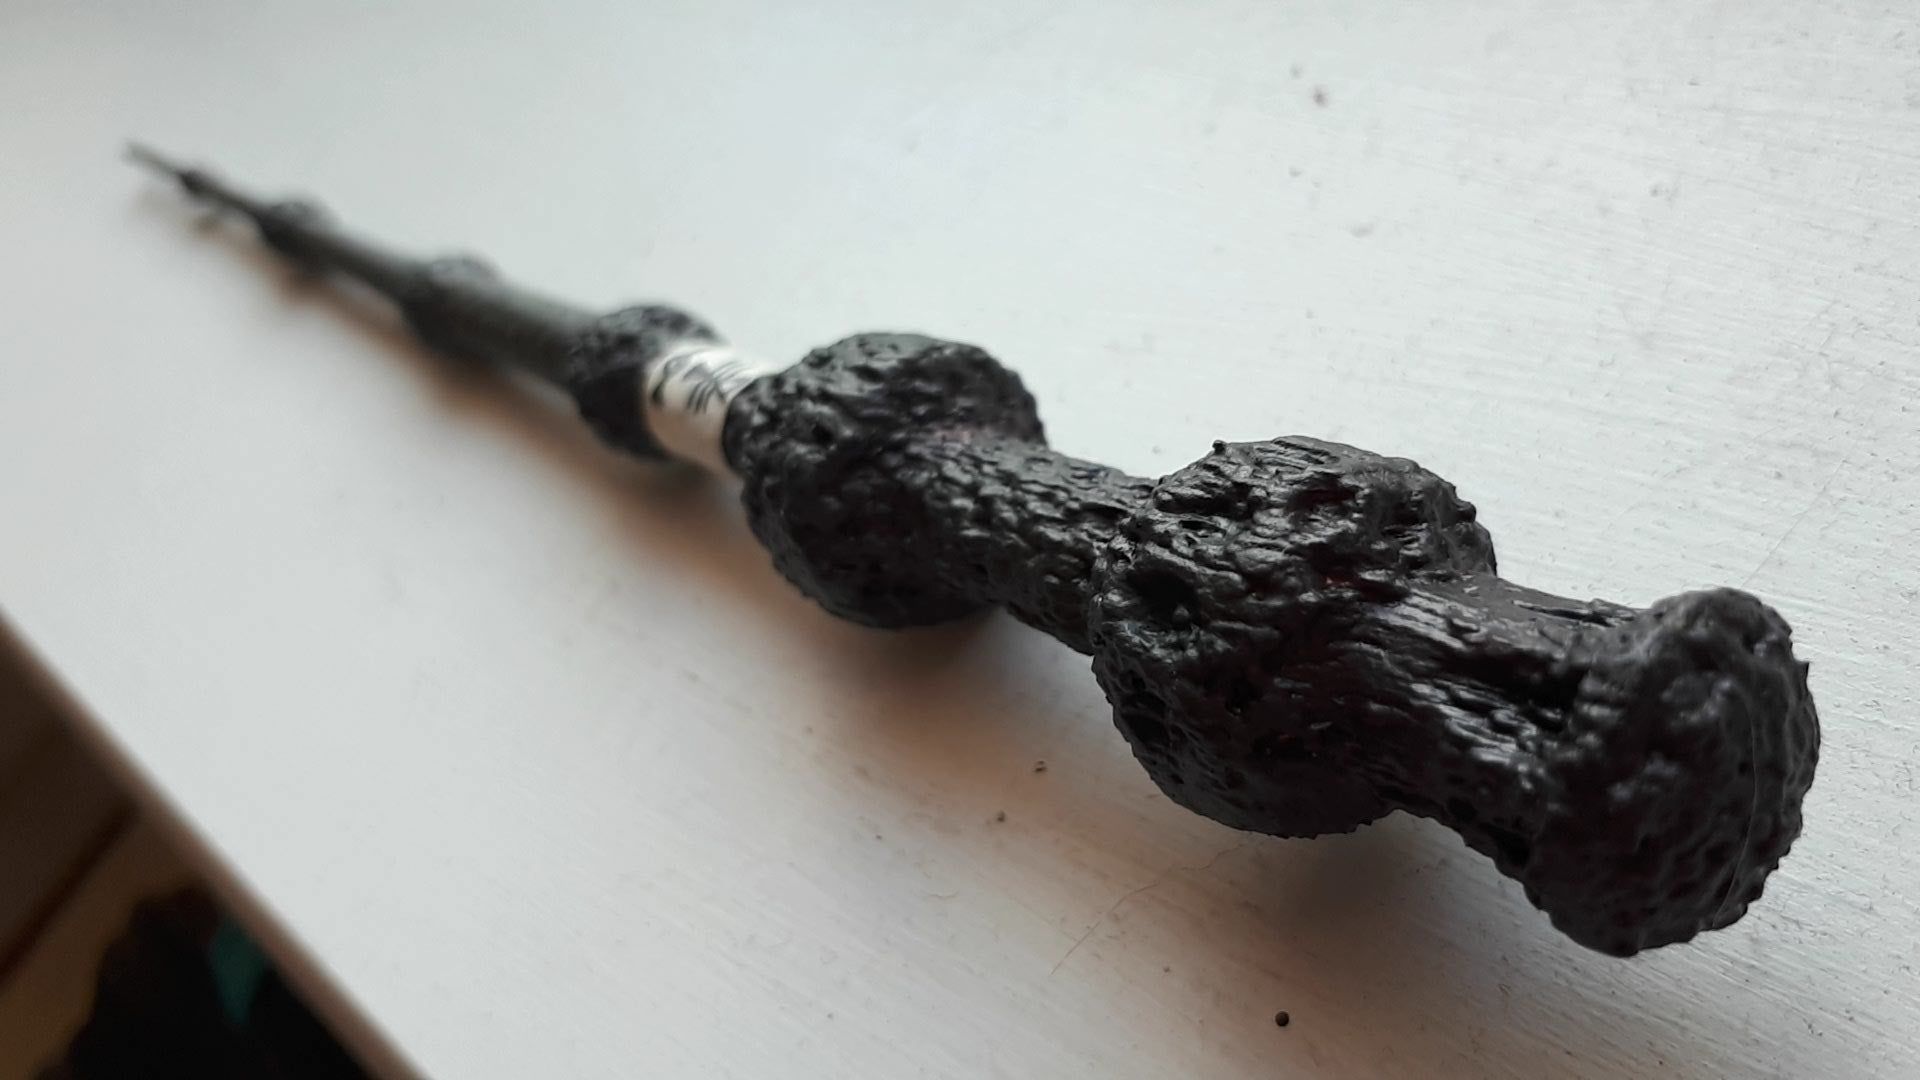 3D printed and painted the Elder Wand. It's too dark, but I'm